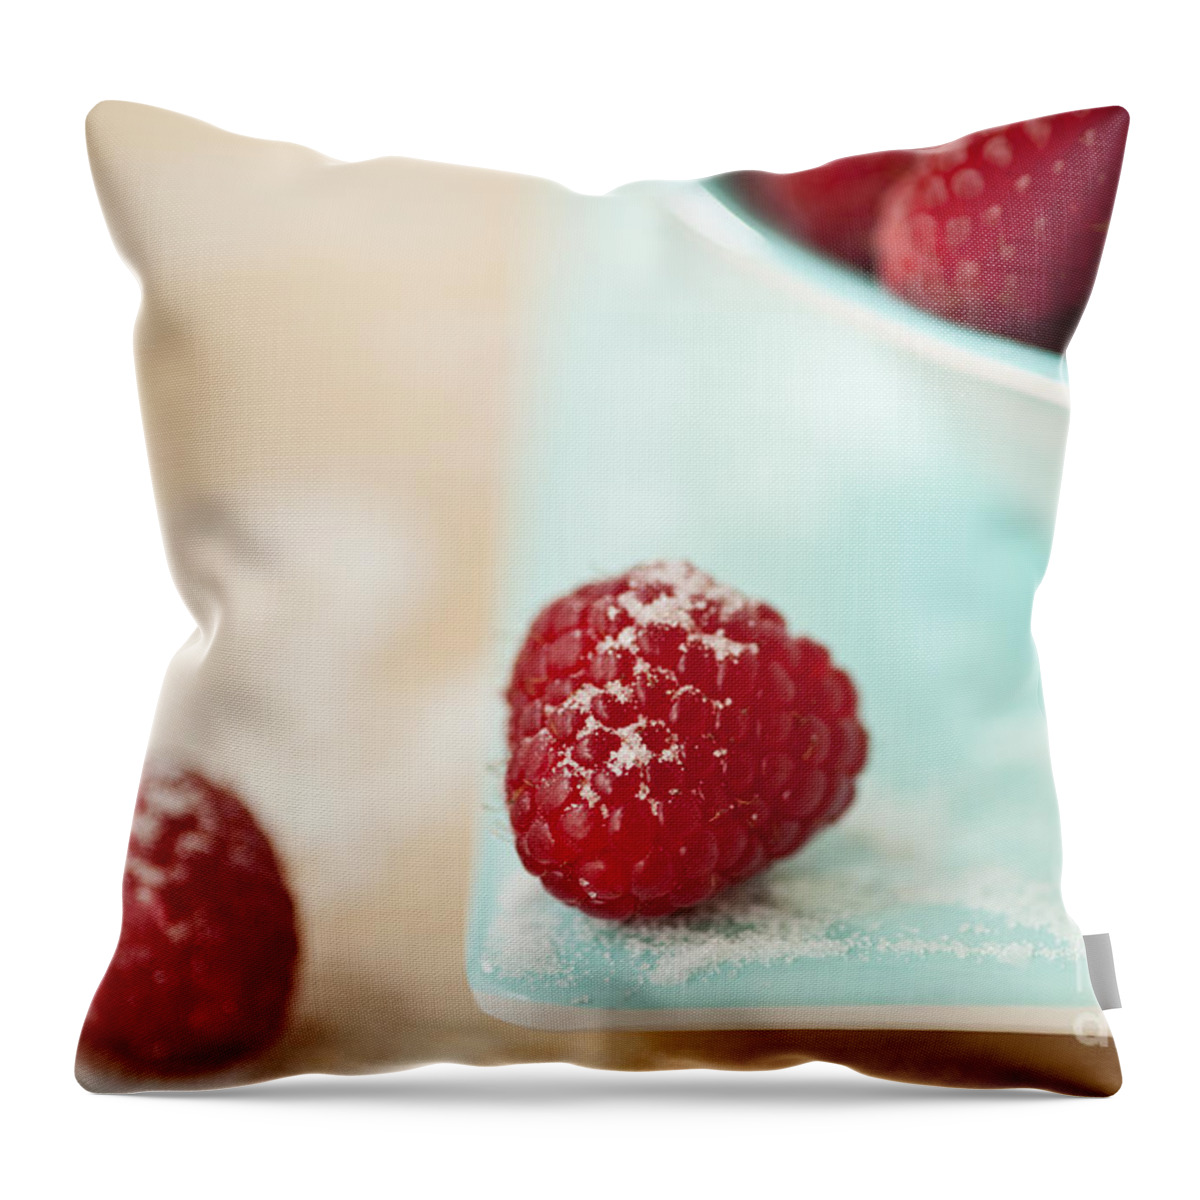 Abundance Throw Pillow featuring the photograph Raspberries Sprinkled With Sugar by Jim Corwin